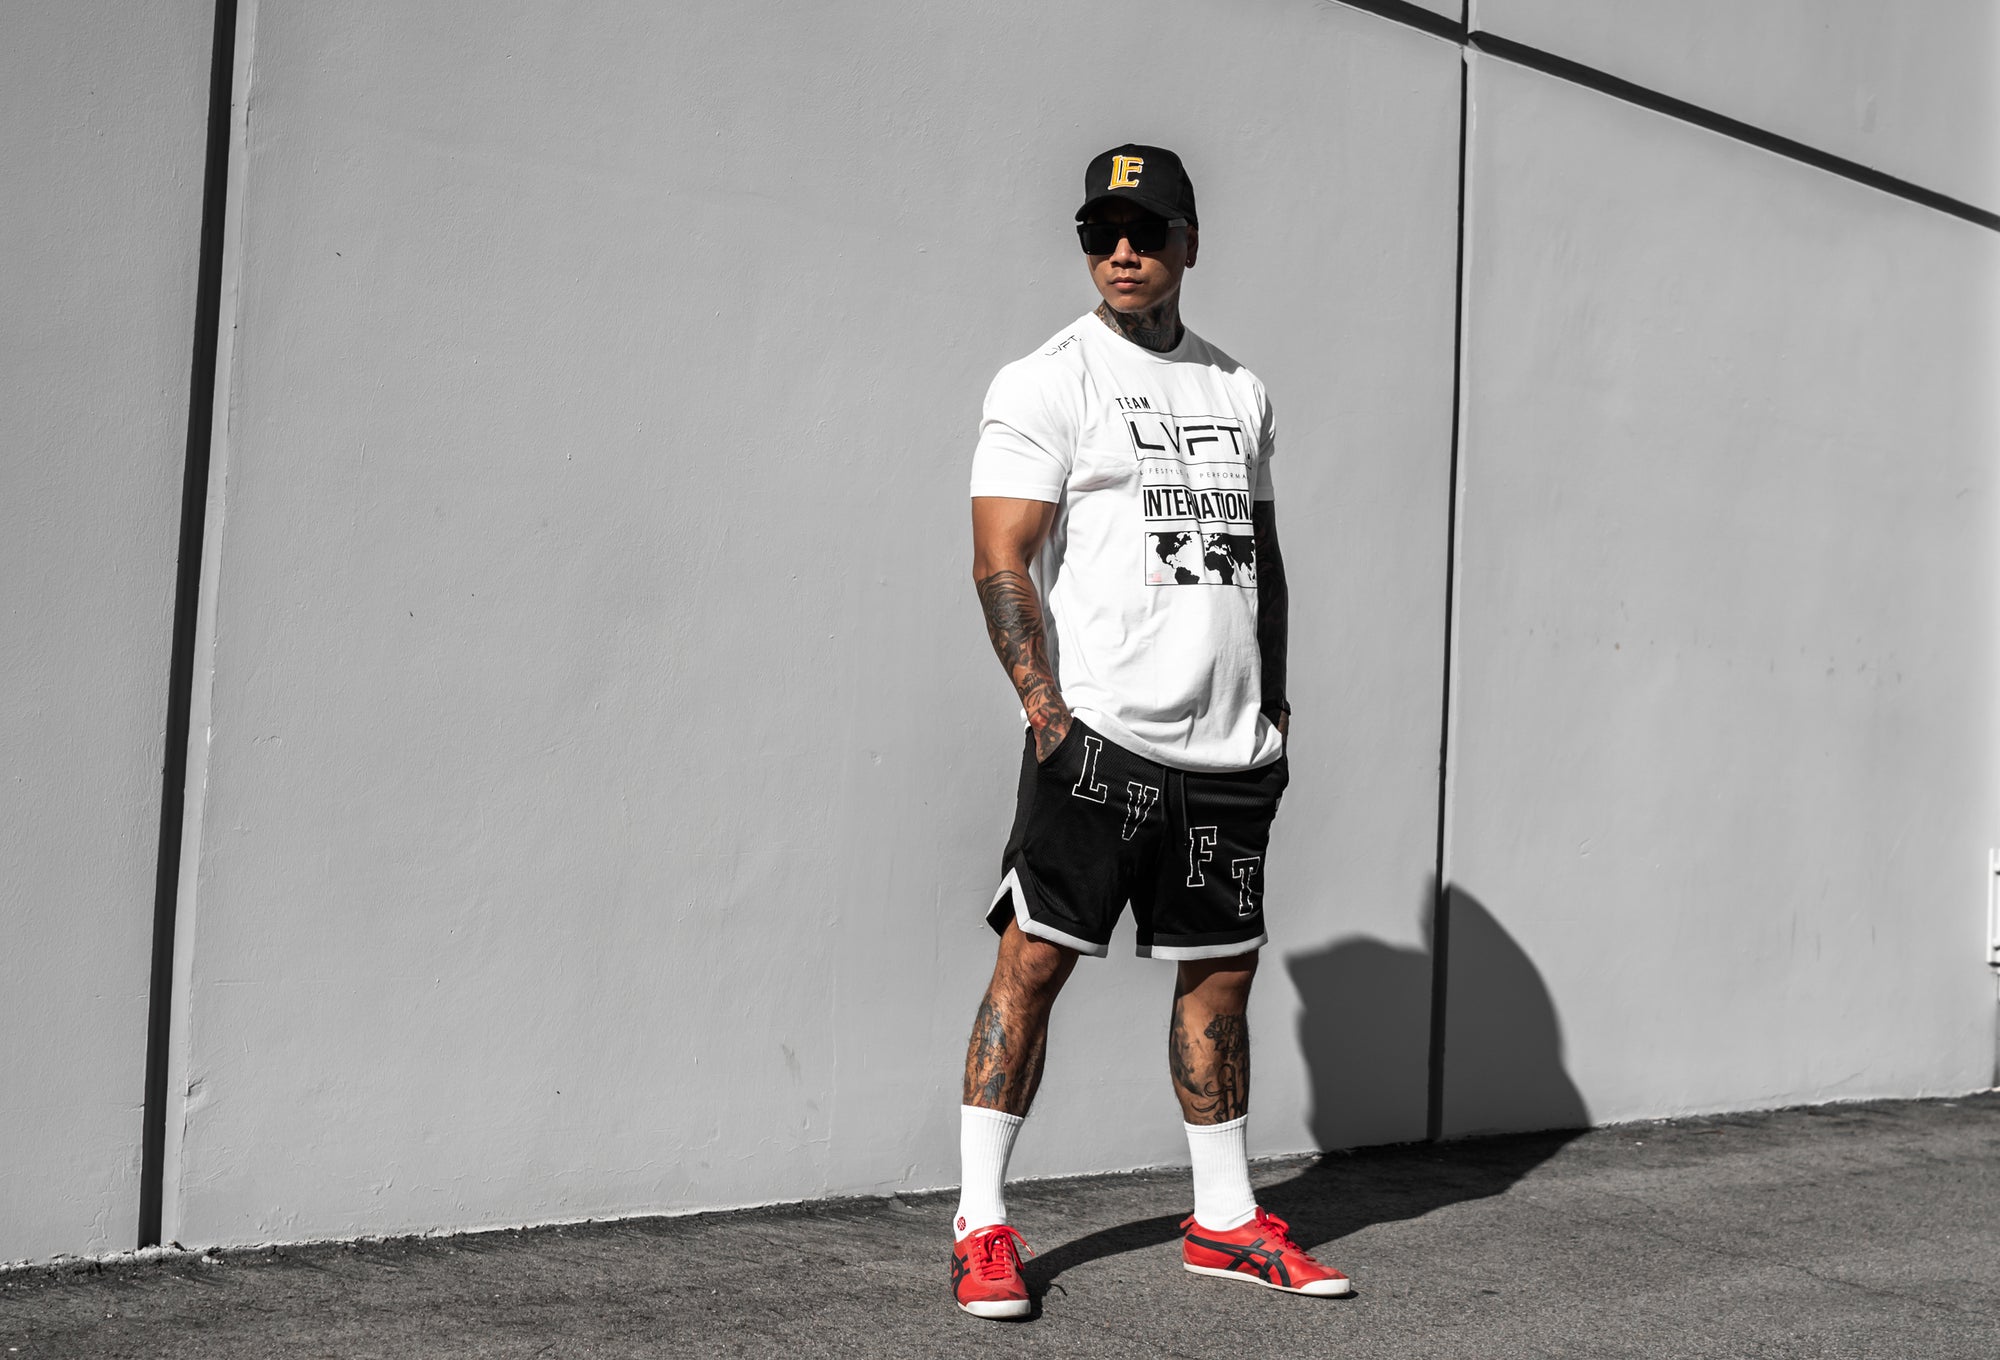 ALL NEW HEAVY WEIGHT OVERSIZED TEES - Live Fit. Apparel